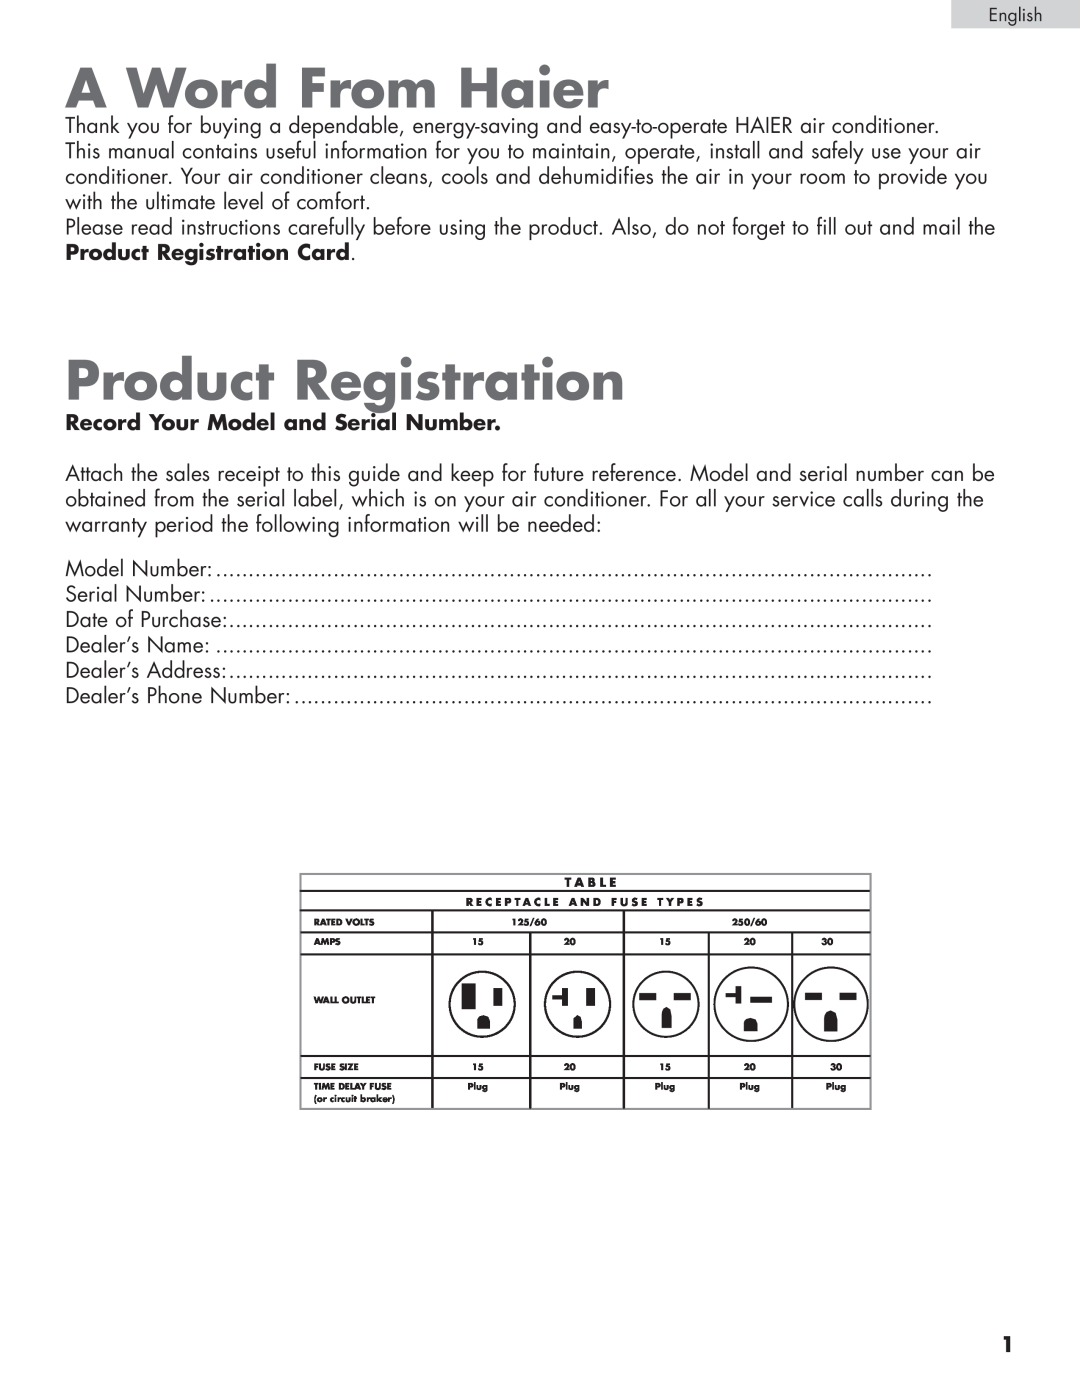 Haier HPRD12XC7, HPRD12XH7 user manual A Word From Haier, Product Registration, Record Your Model and Serial Number 